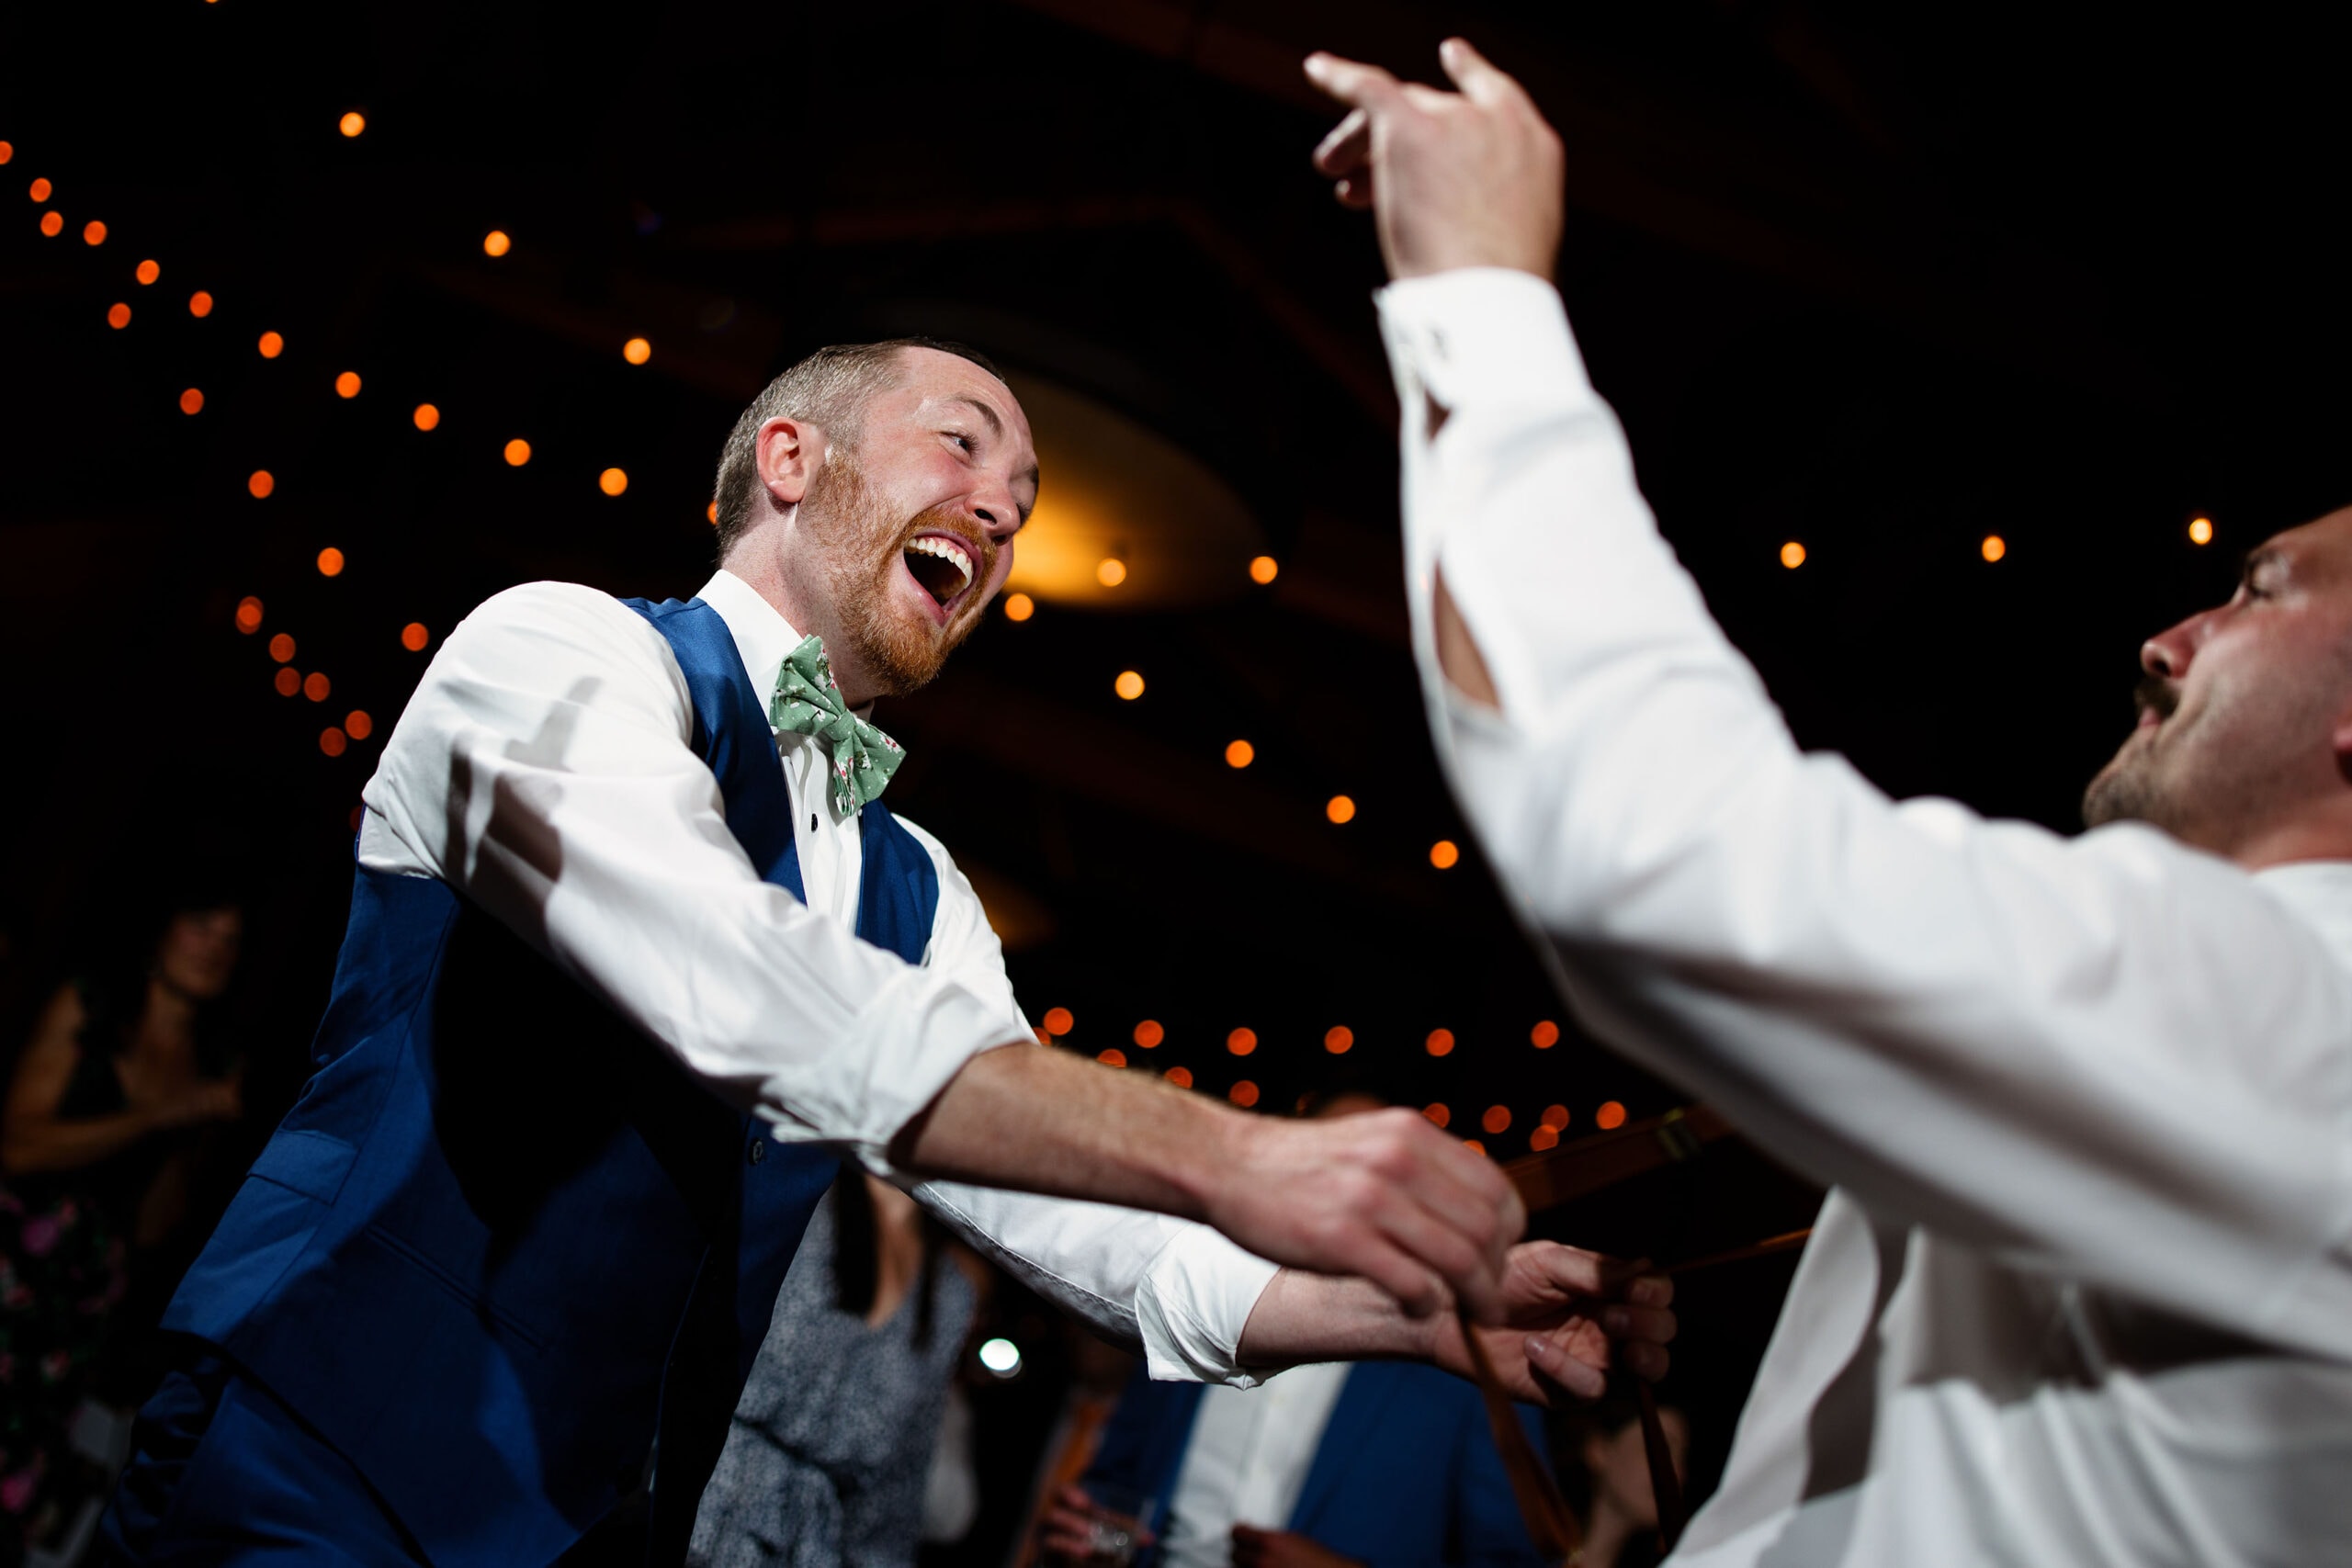 Guests dance during Caitlin and Gavin’s wedding at Black Mountain Lodge